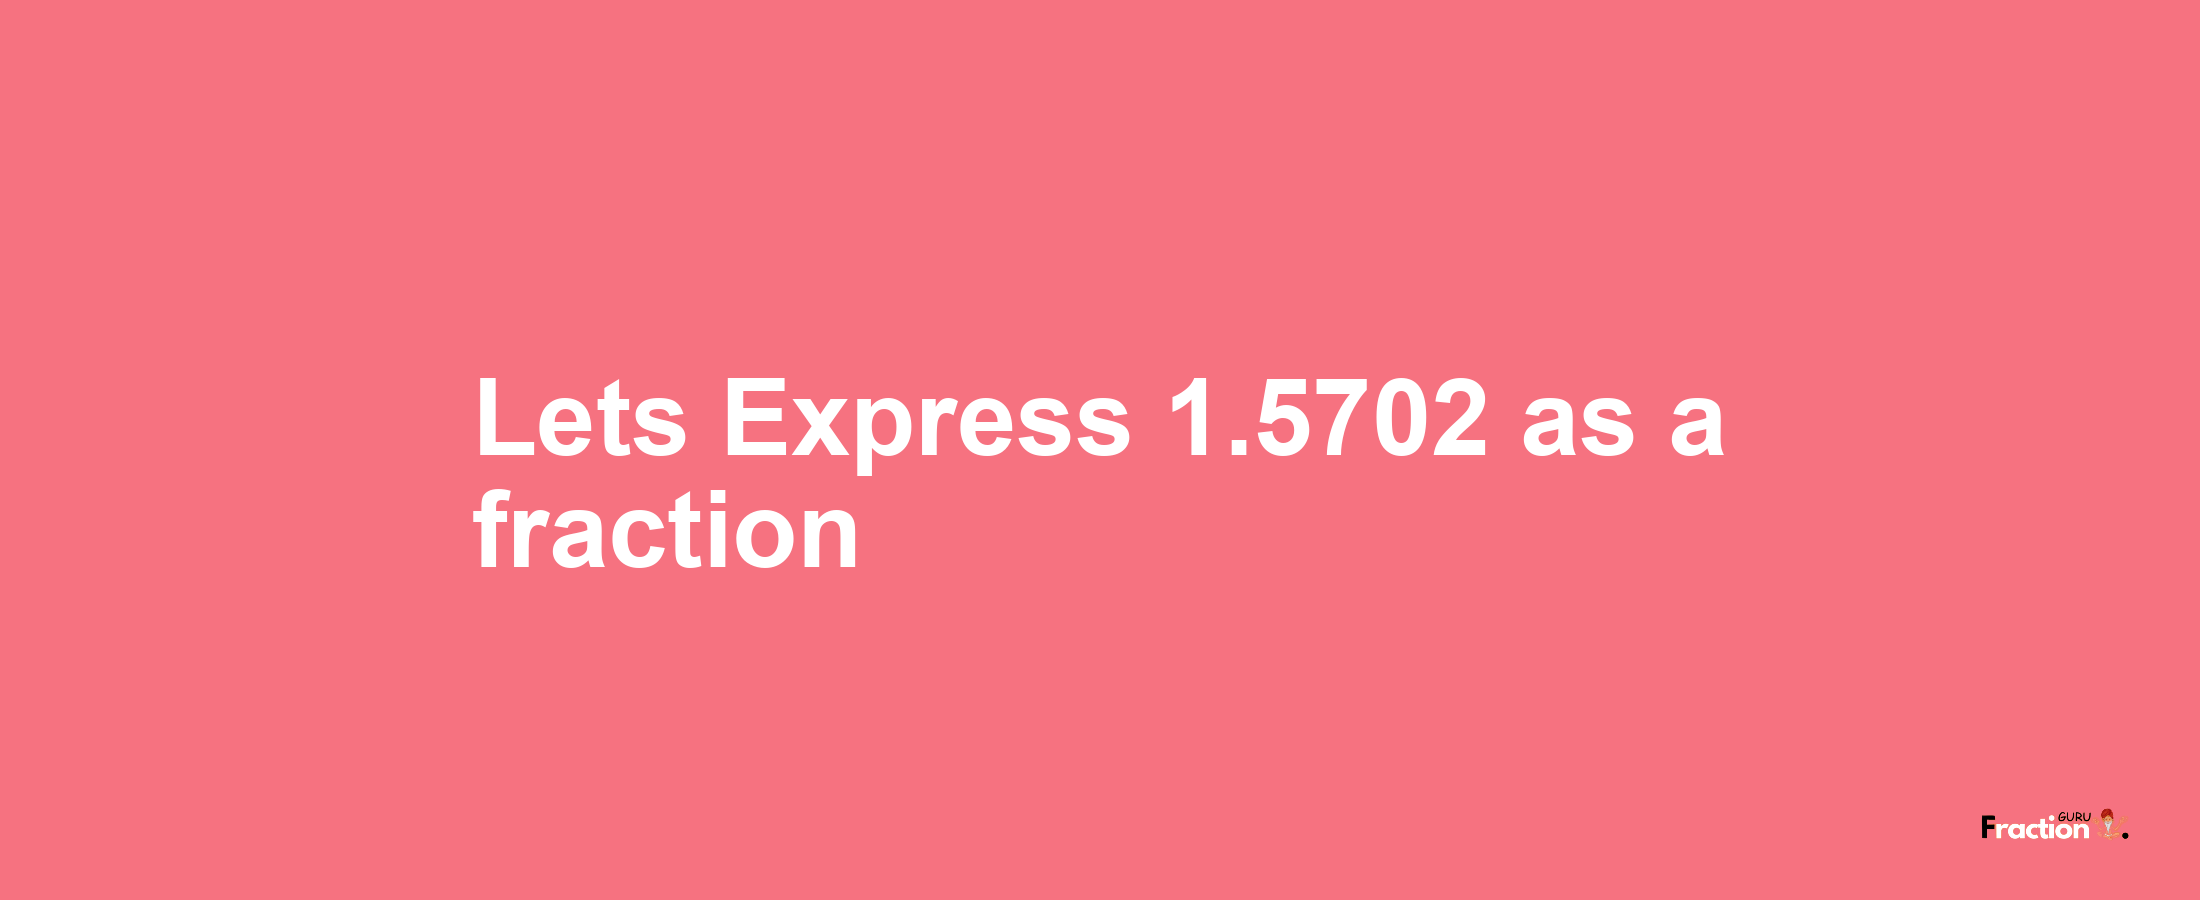 Lets Express 1.5702 as afraction